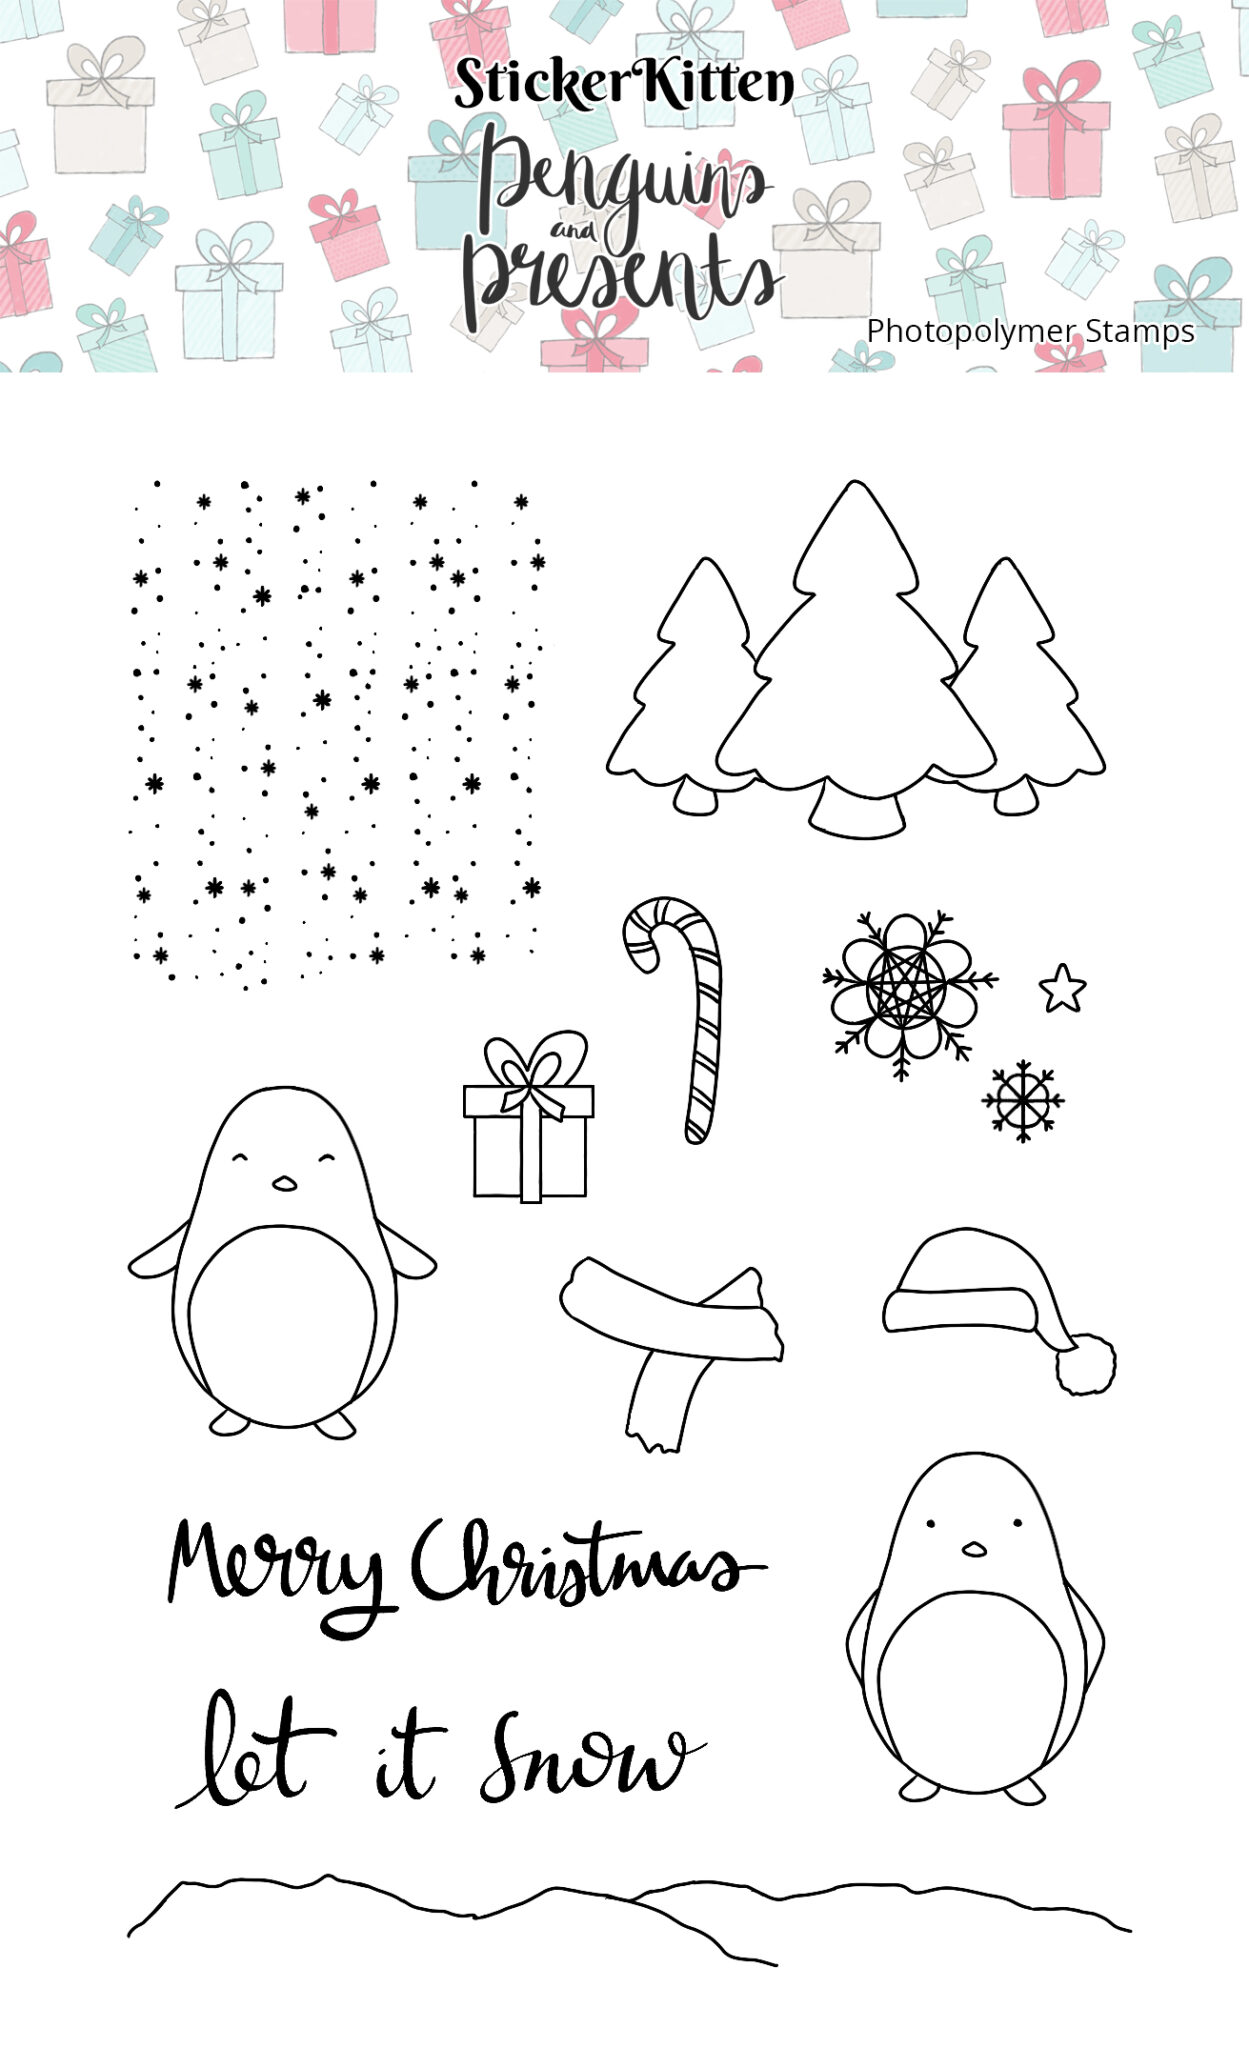 Penguins and Presents photopolymer stamps from StickerKitten